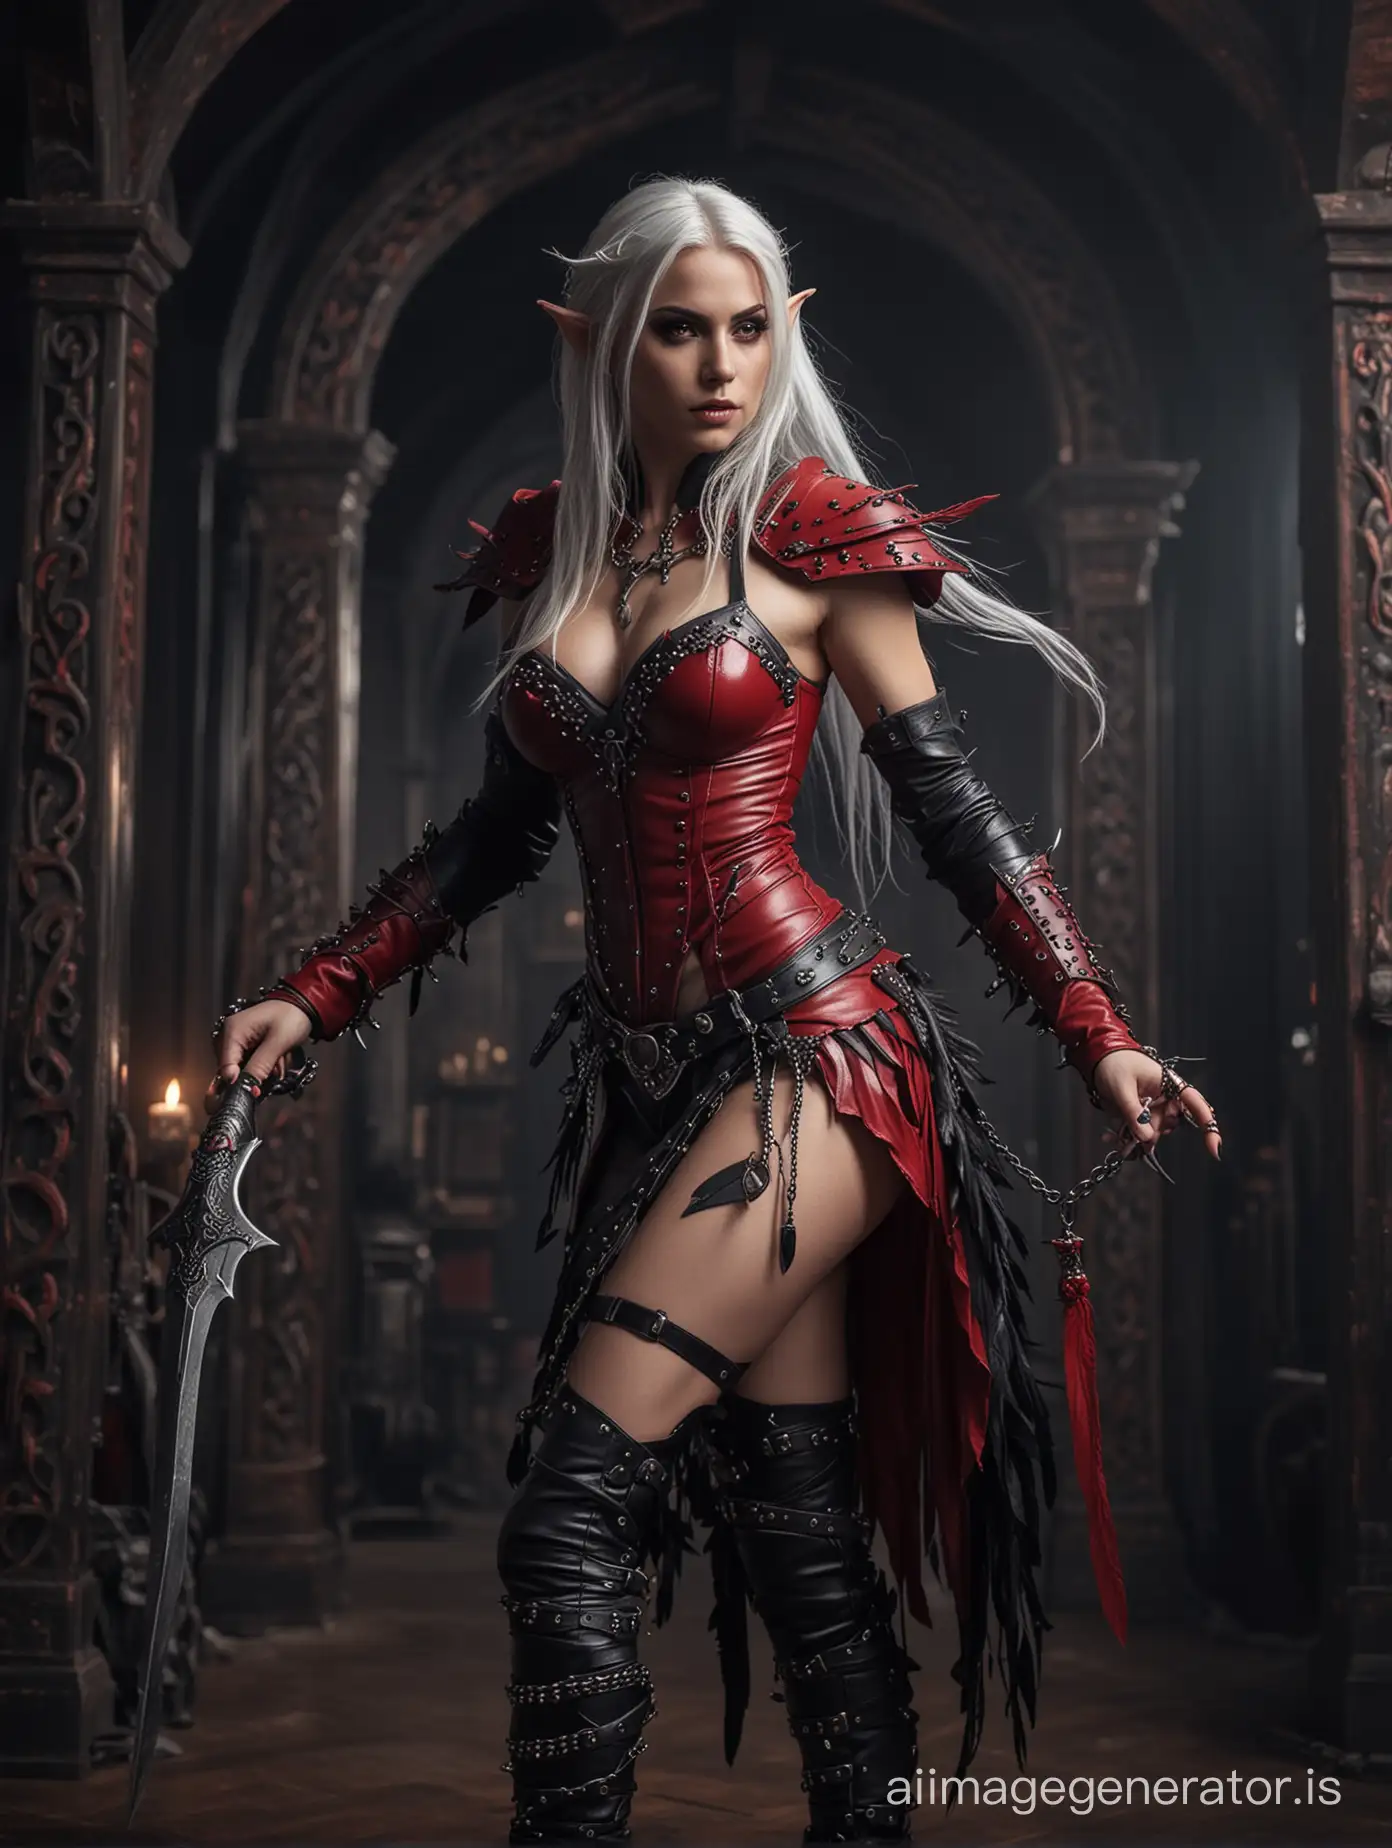 Young thin sexy female elf with very long white hair, grey skin, lots of body red tattoos, black glowing eyes and lots of running eye makeup. Wearing red studded leather armor with spikes and black feathers and red ribbons. carrying  dagger and chains. setting on a throne with dark shadows in the background